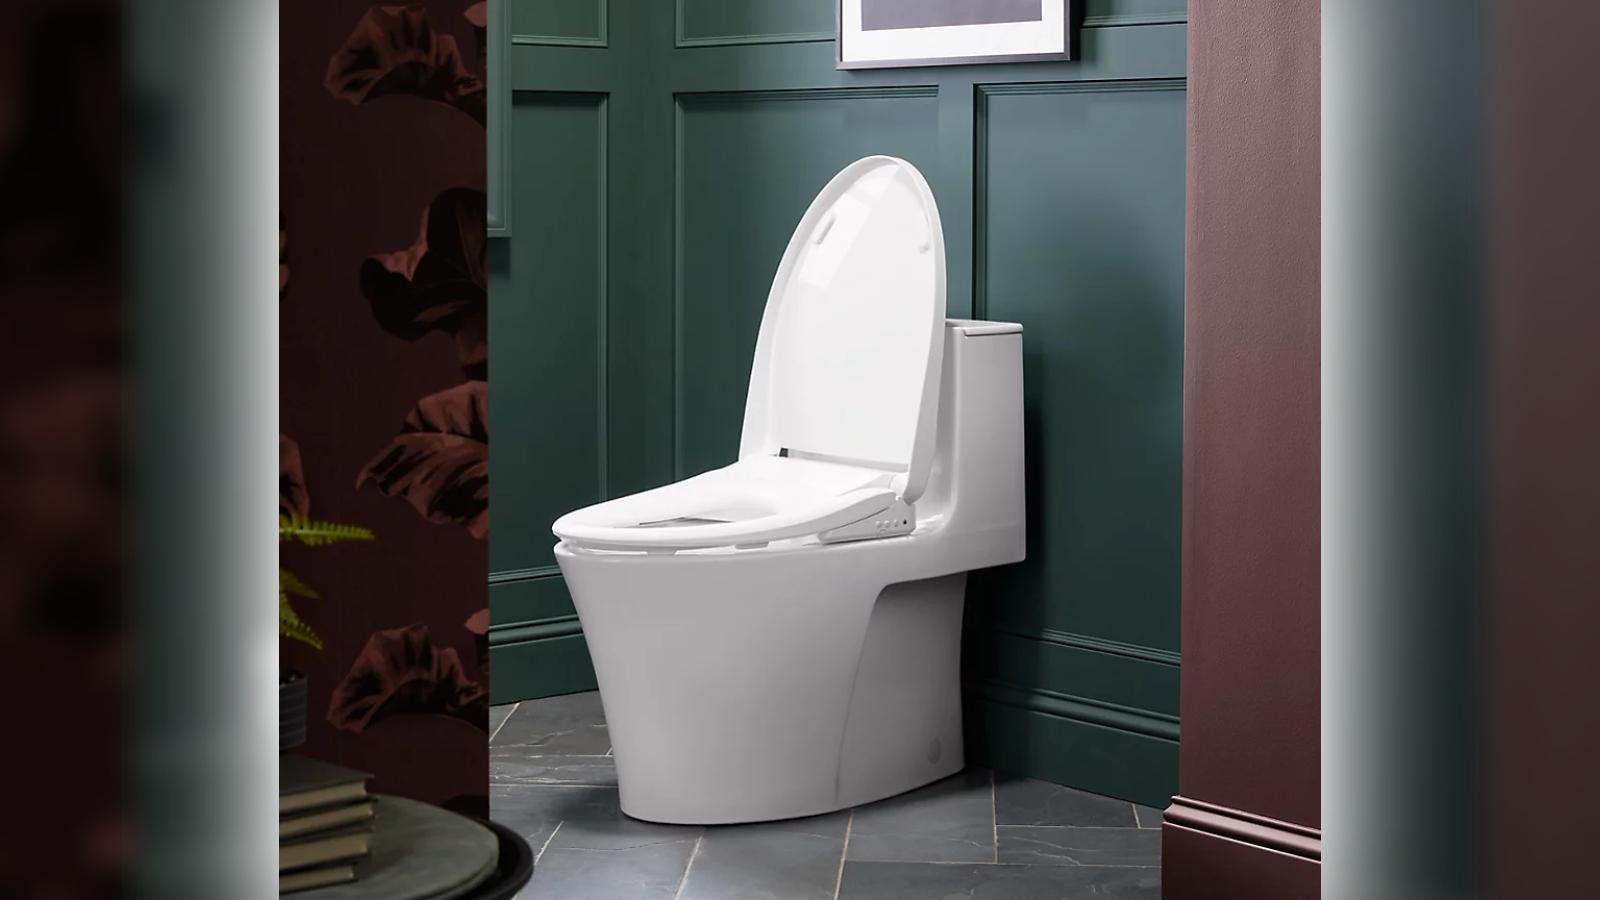 Kohler Smart bidet in a room. Image surrounded by blurred background with a white halo